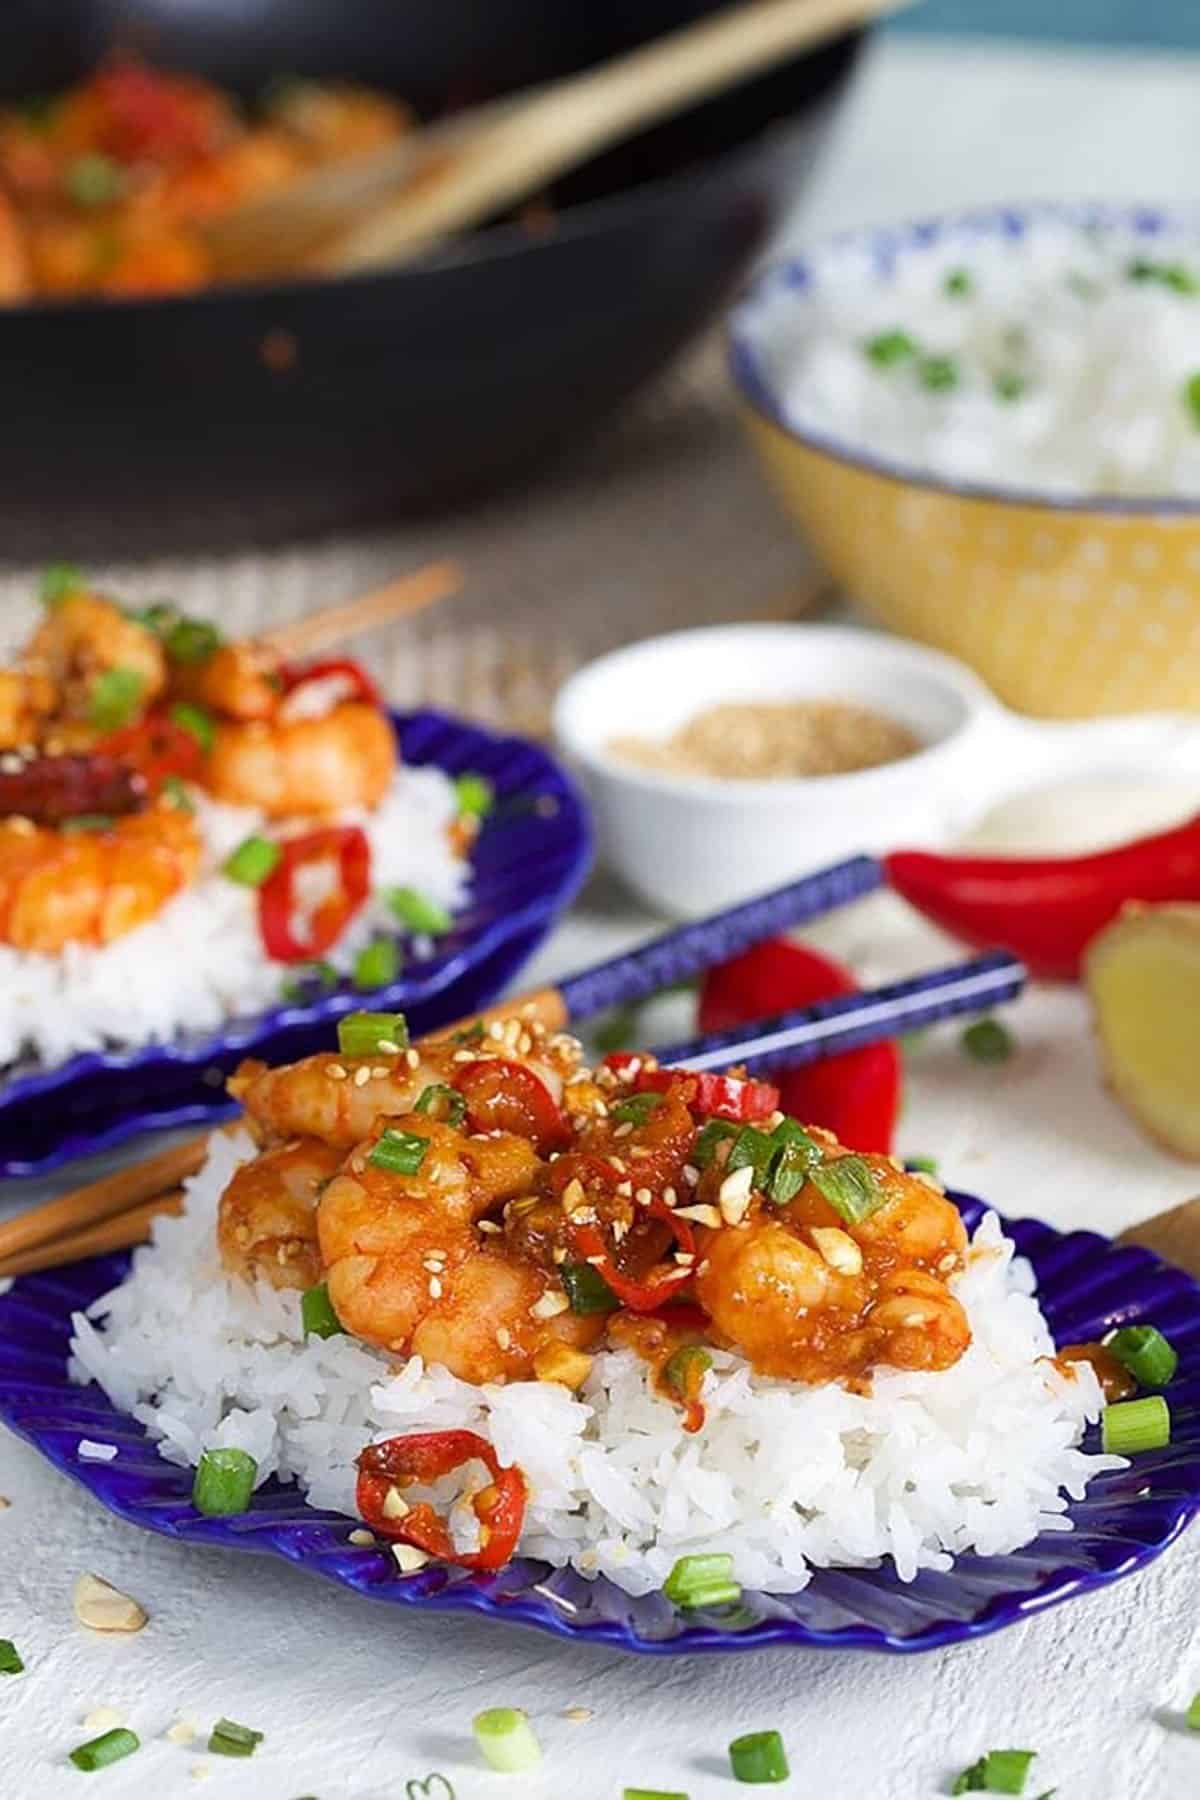 Easy Szechuan Shrimp recipe on a bed of white rice on a square blue and white plate with silver chopsticks.